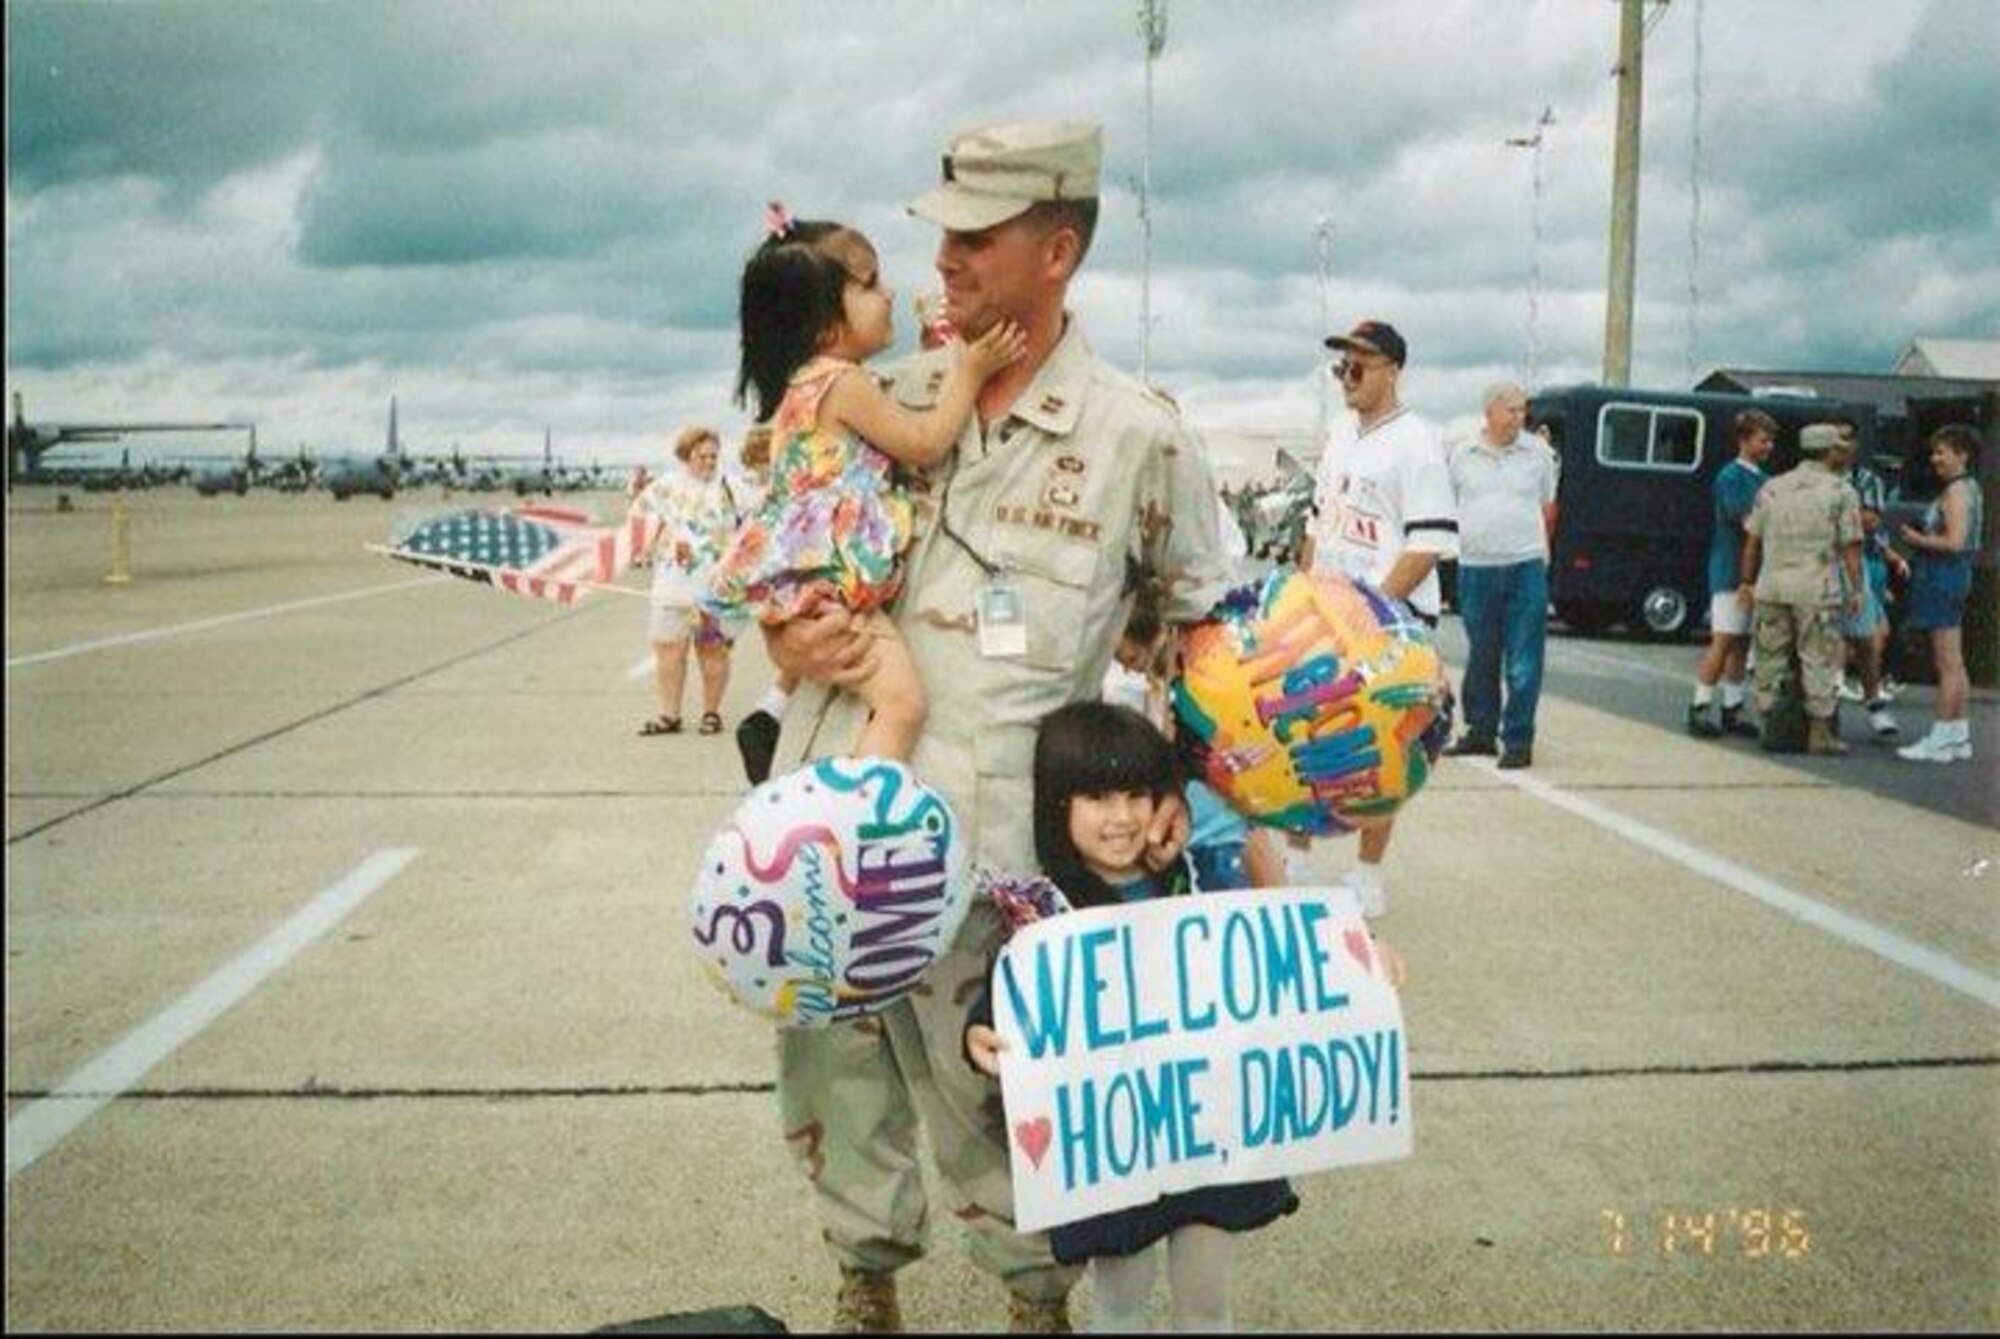 Then-Capt. Adam Dickerson at a homecoming celebration at Little Rock Air Force Base, summer 1996. (Courtesy Photo)